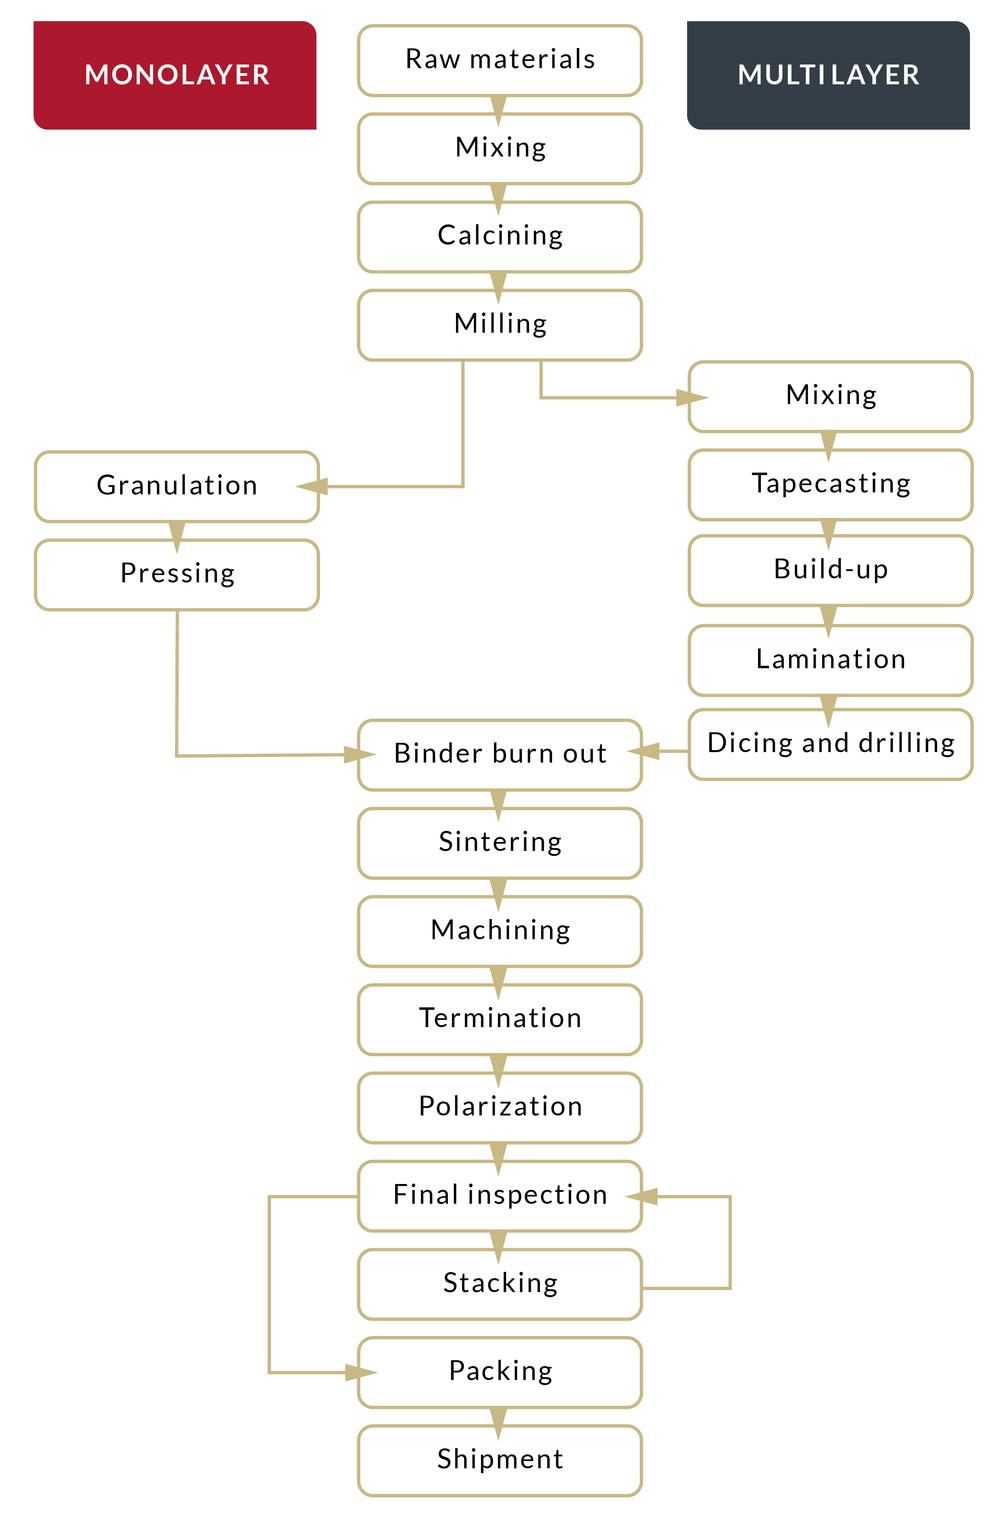 Process flow map of multilayer processing